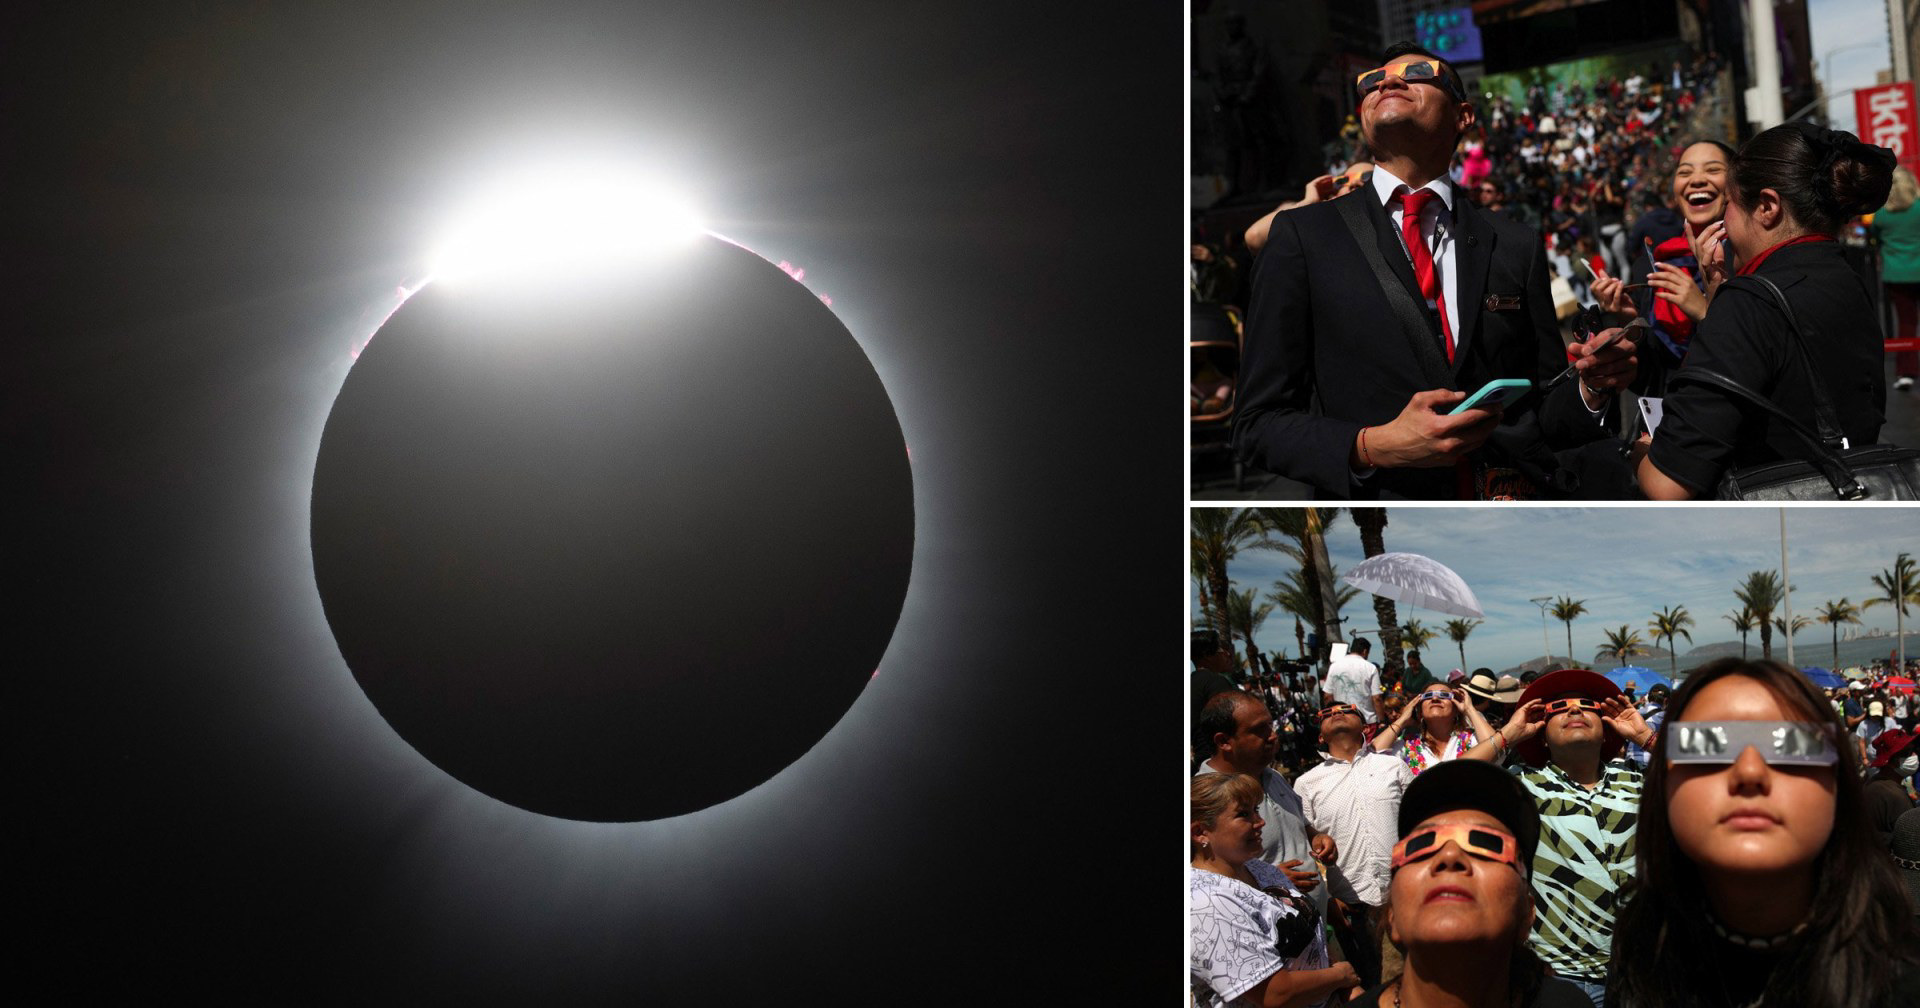 Pictures of the solar eclipse from across North America